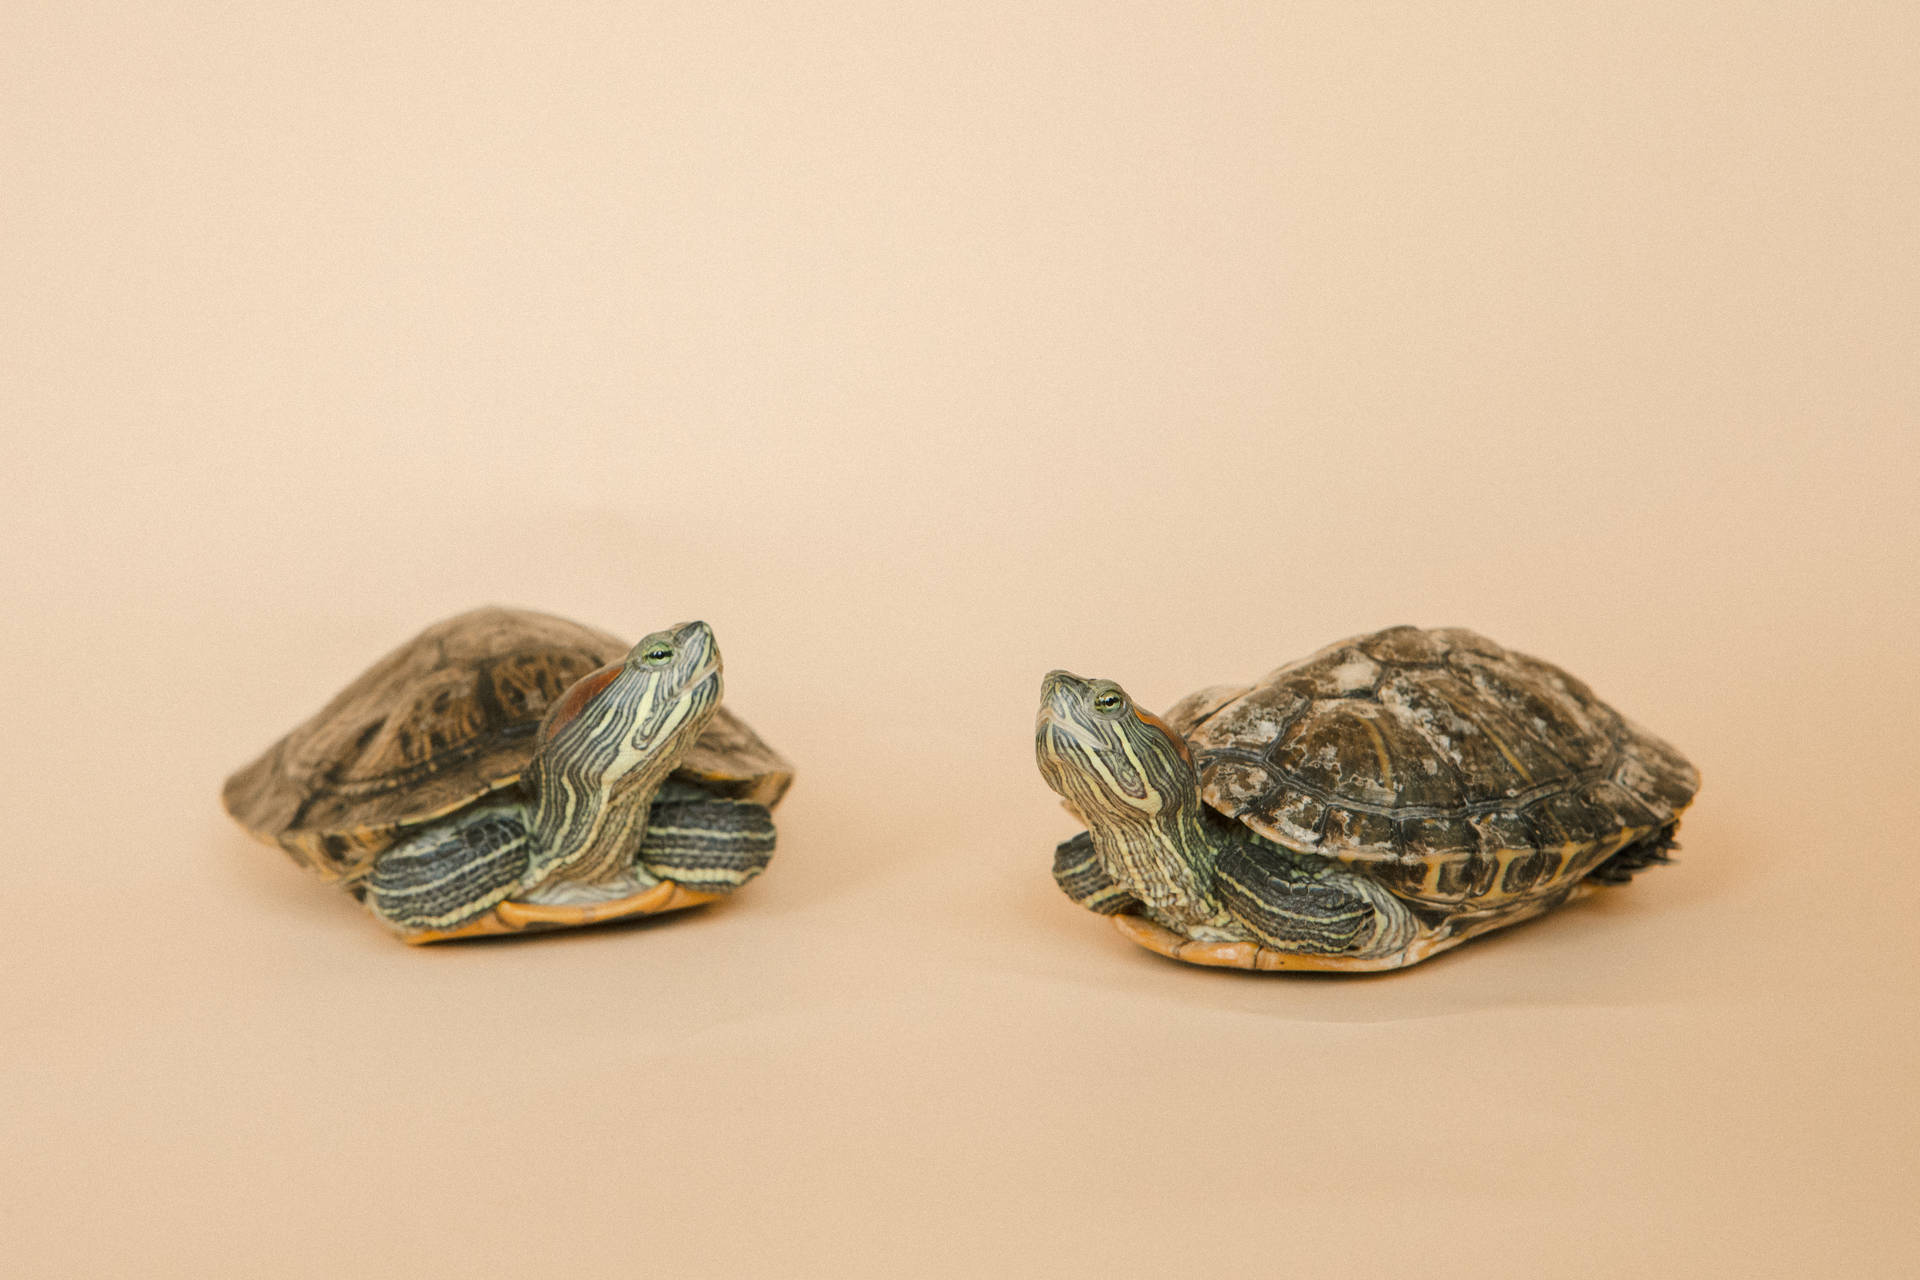 Two Turtles Cute Animals Wallpaper